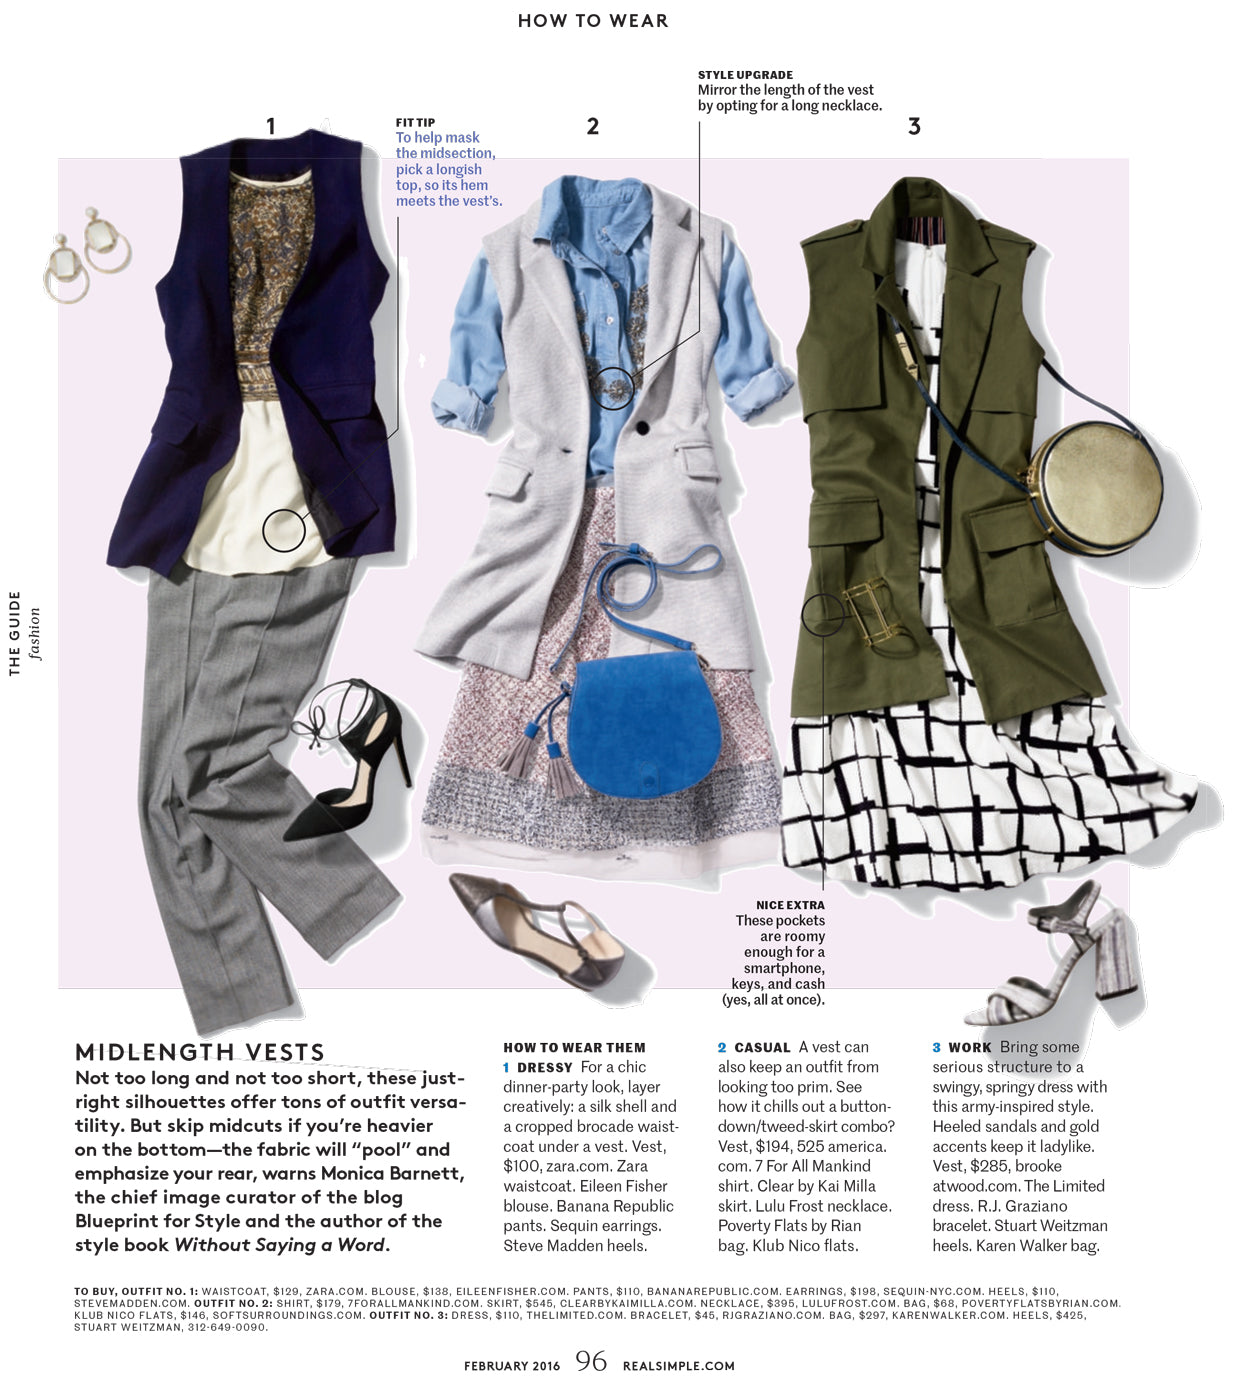 Real Simple February 2016 - How to Wear a Vest, featuring Sequin's Marquesas Earrings